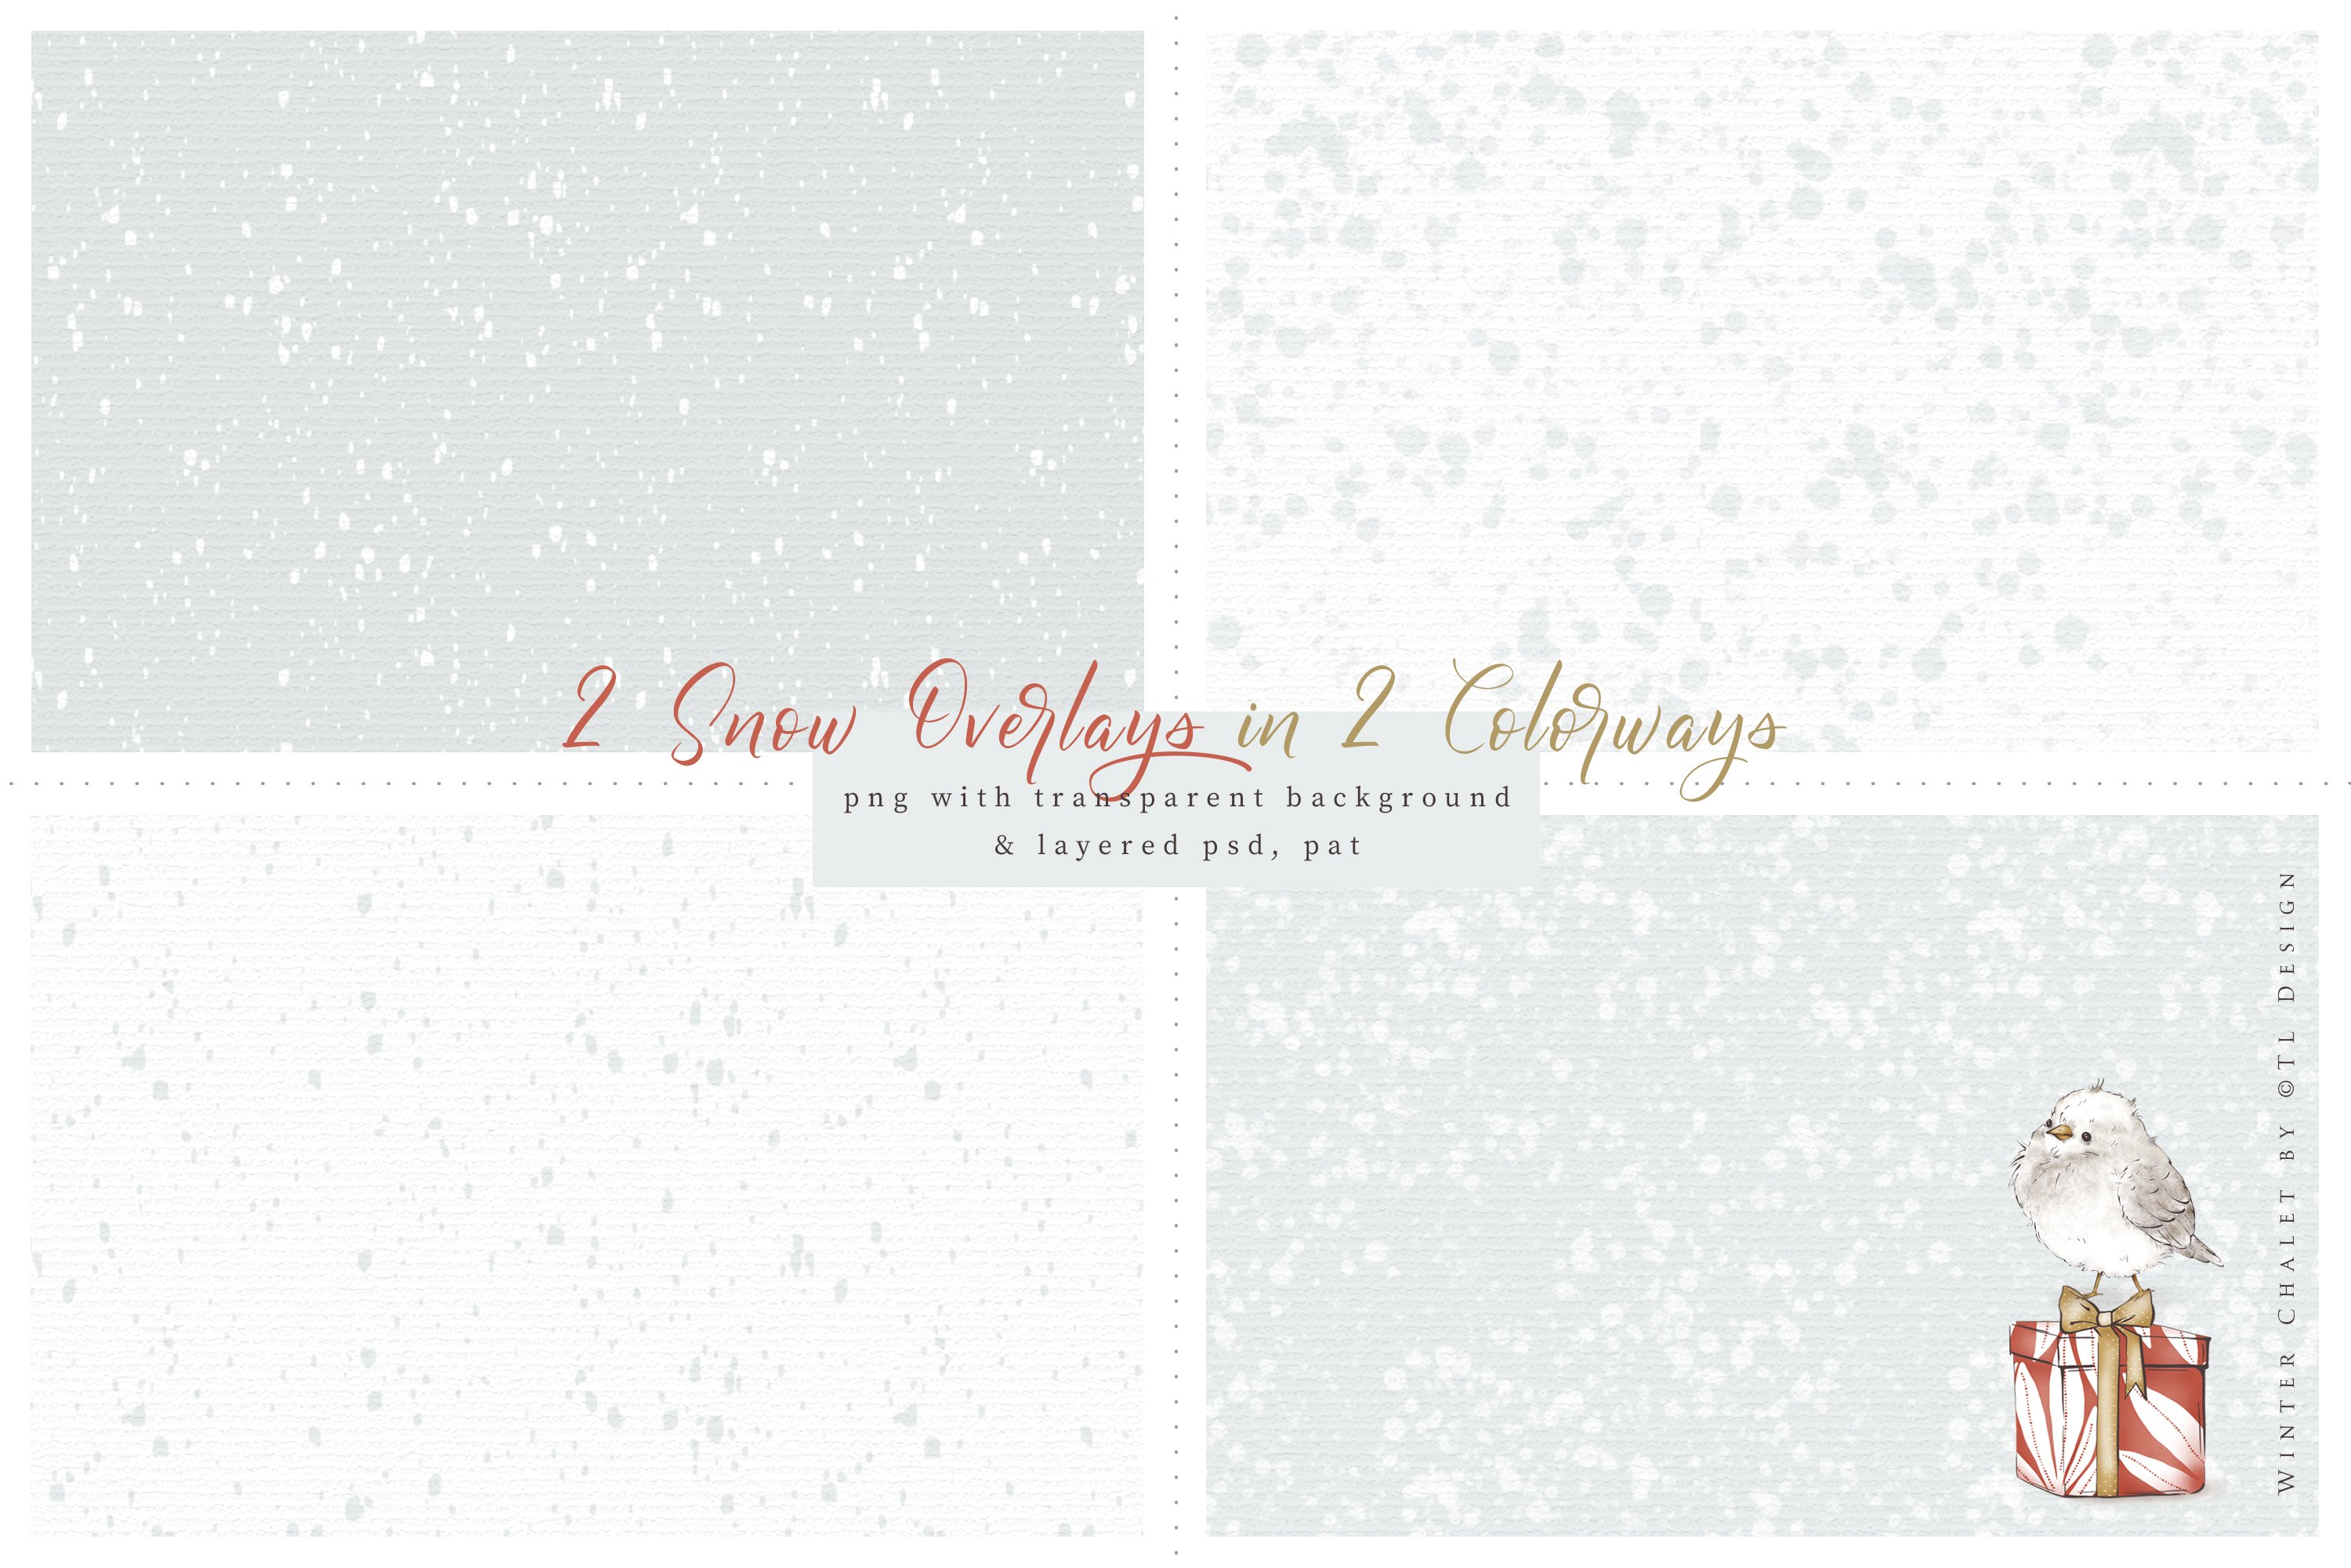 There are 2 snow overlays in 2 color ways.